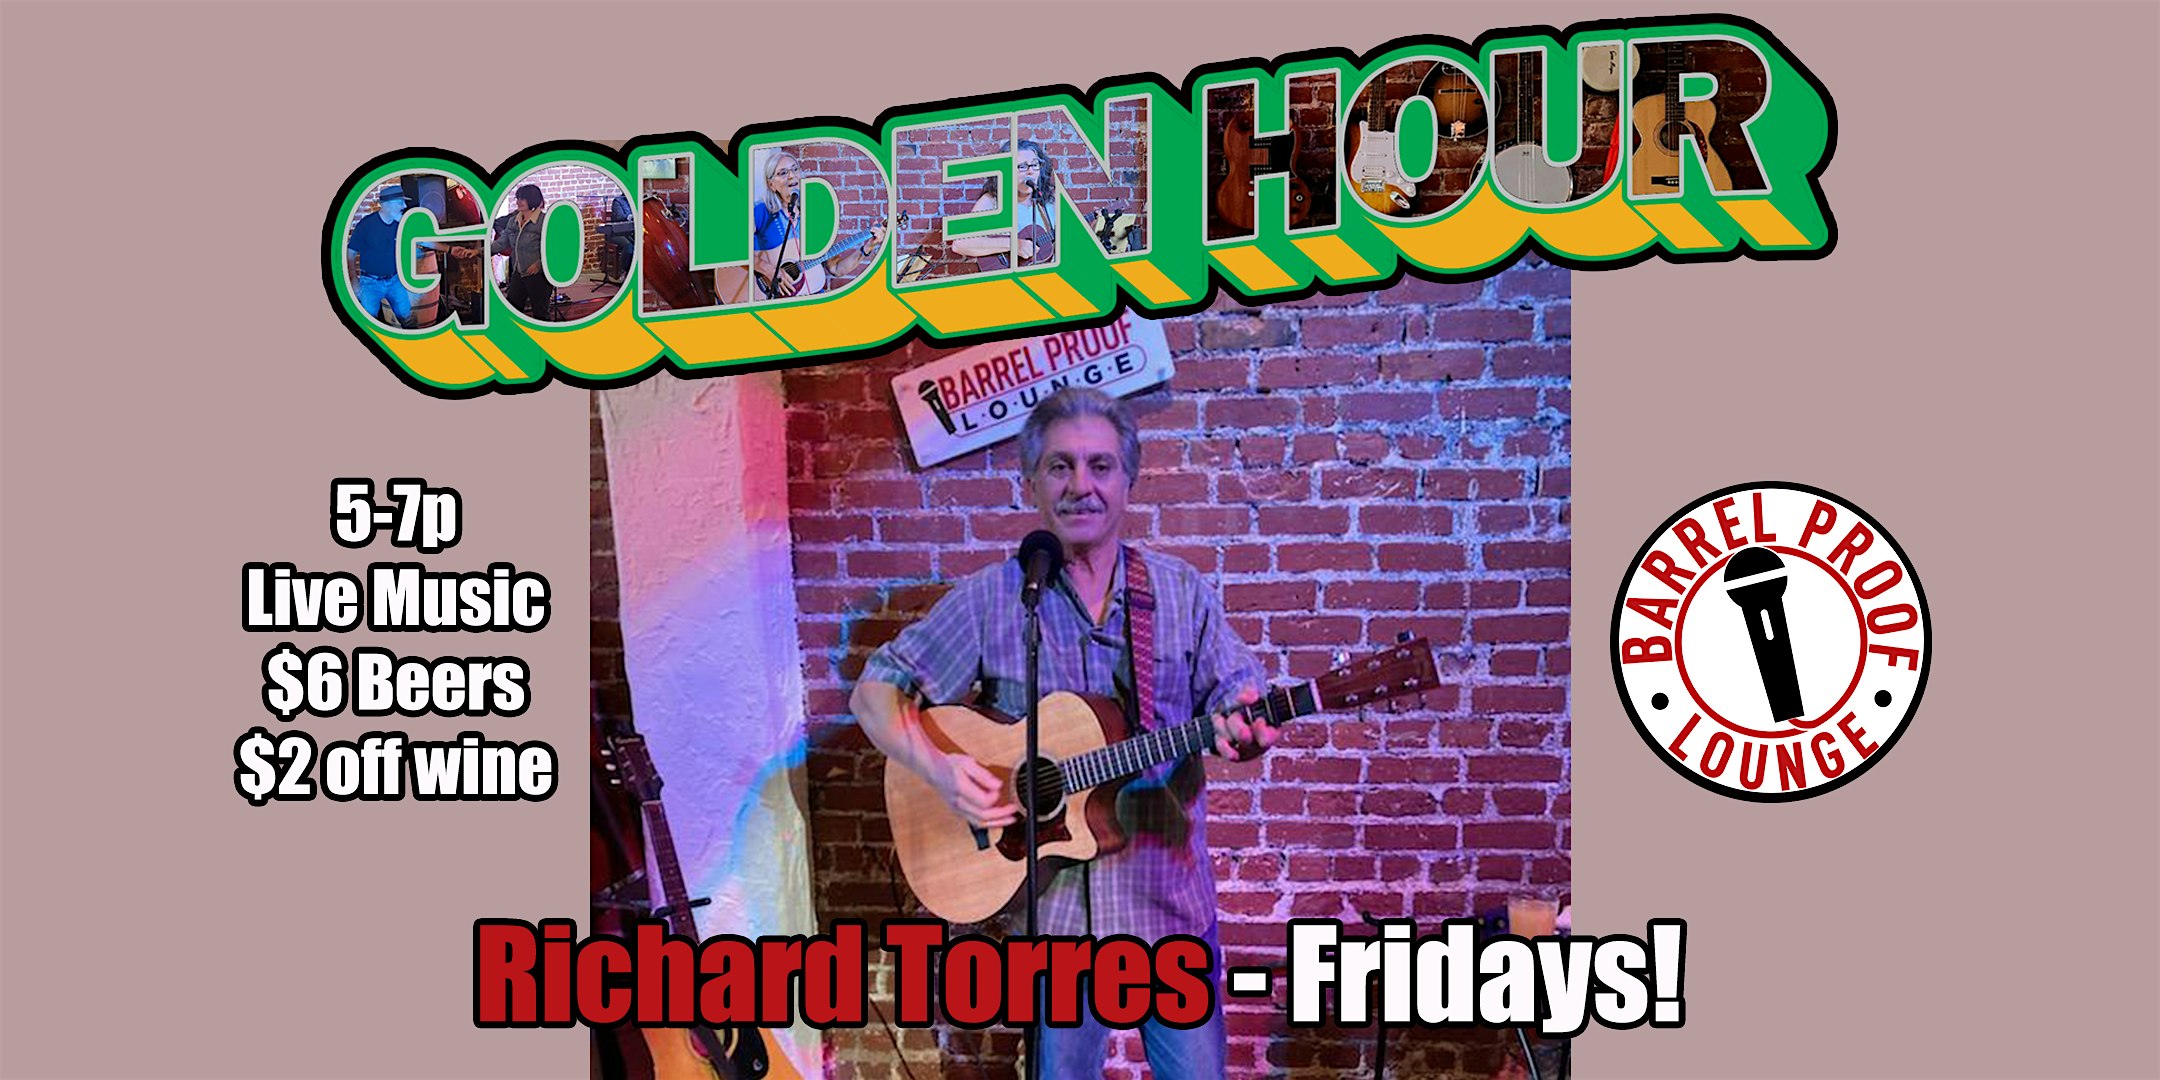 Live Music Happy Hour in Downtown Santa Rosa w/ Richard Torres